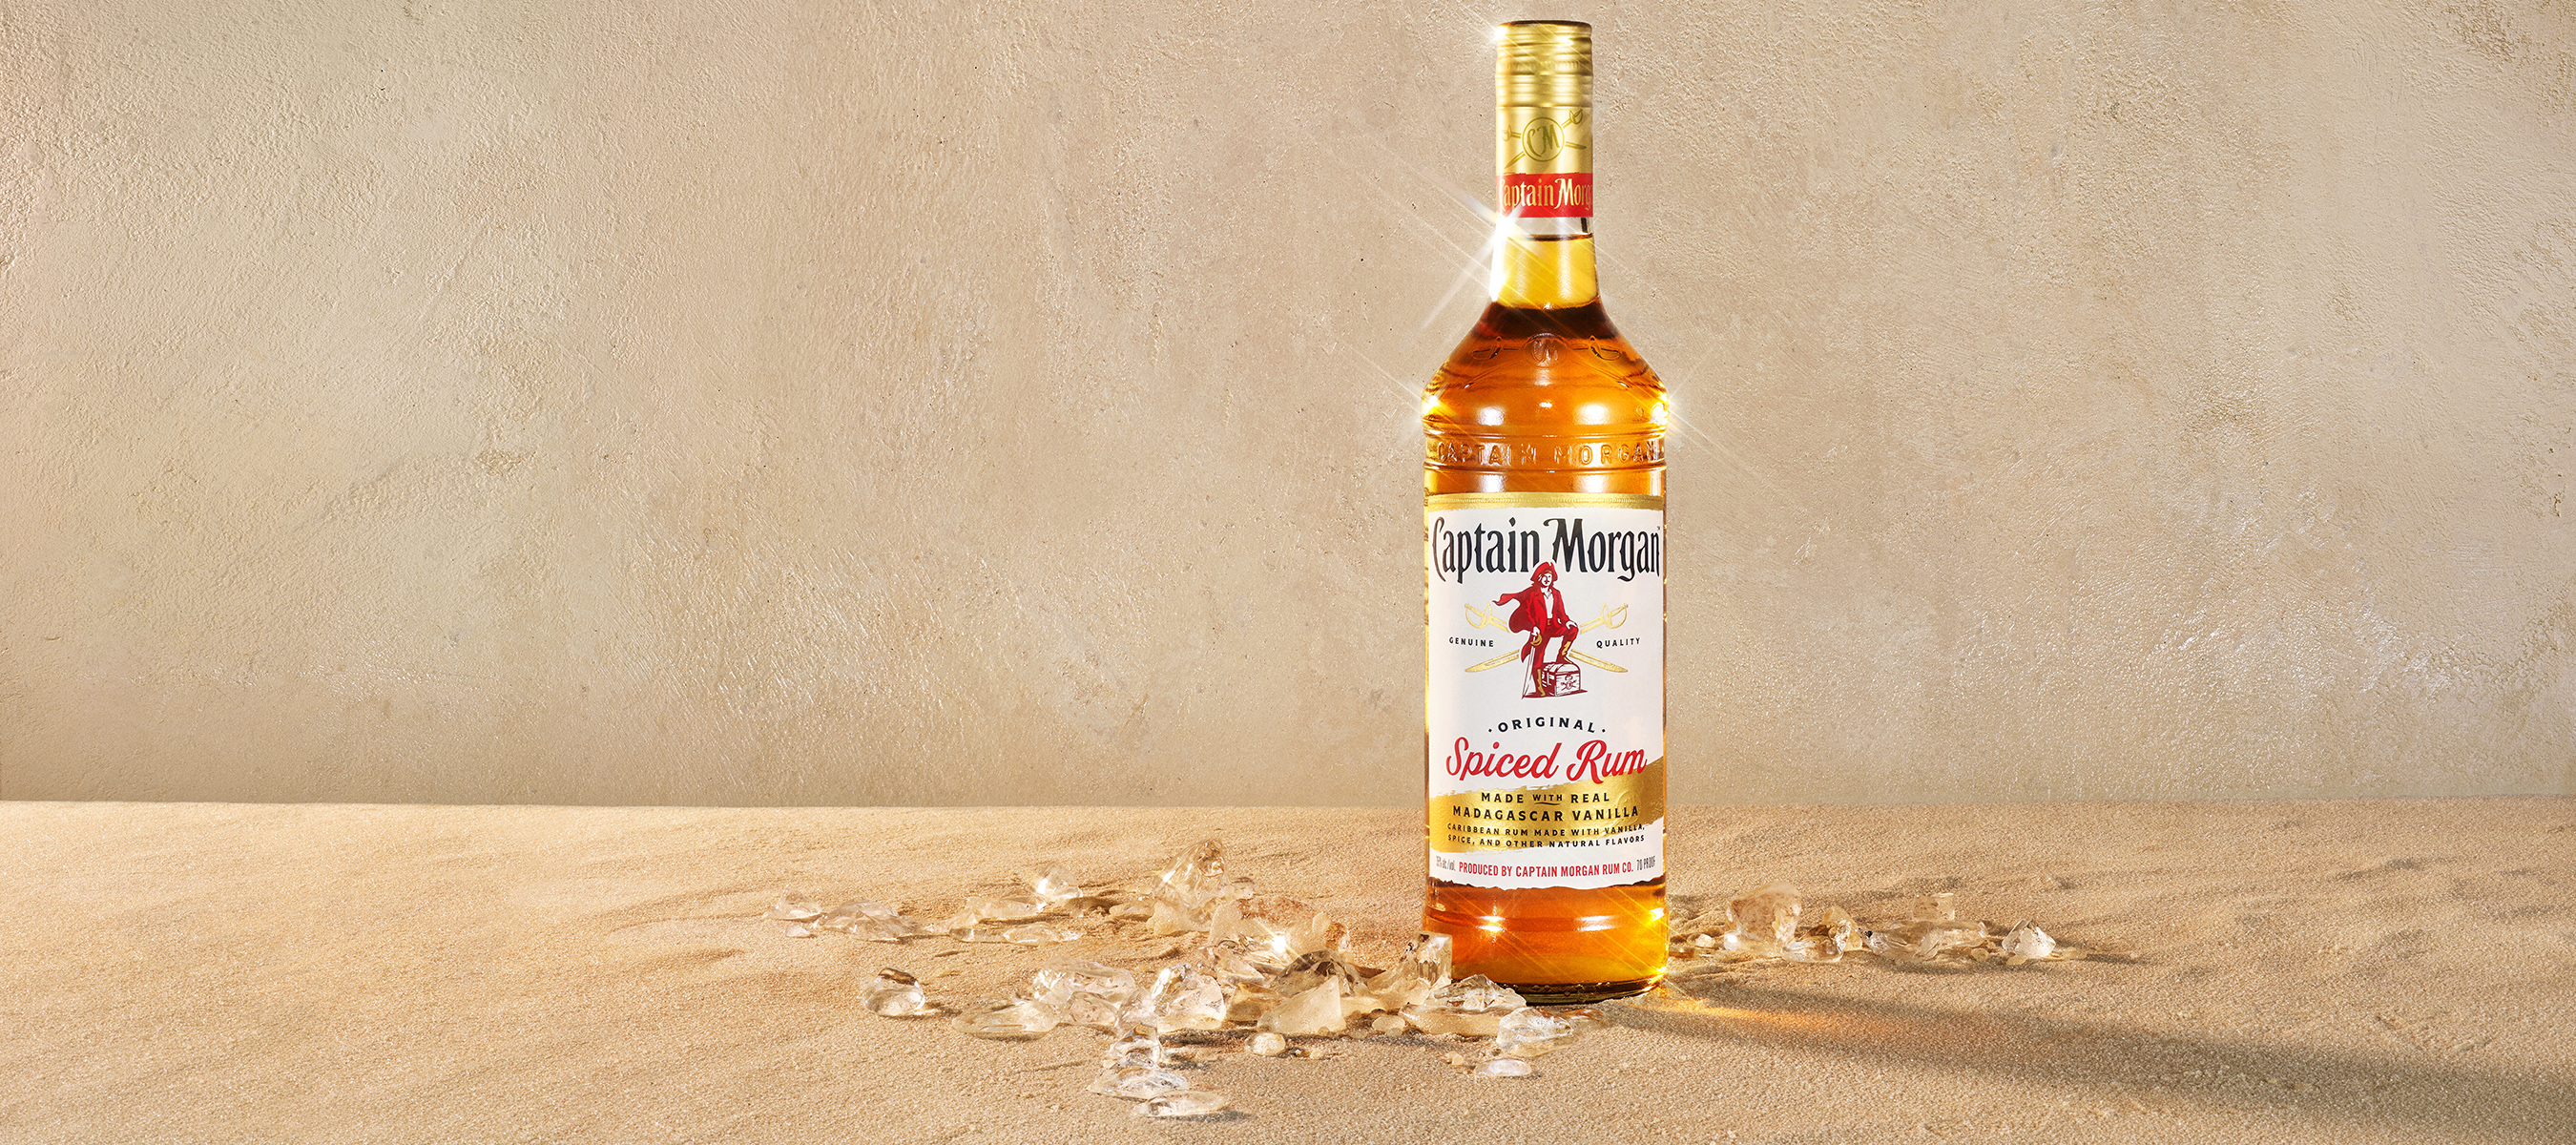 CAPTAIN MORGAN ORIGINAL SPICED RUM LEVELS UP THE LIQUID & LOOK, NOW MADE EVEN BETTER WITH REAL MADAGASCAR VANILLA